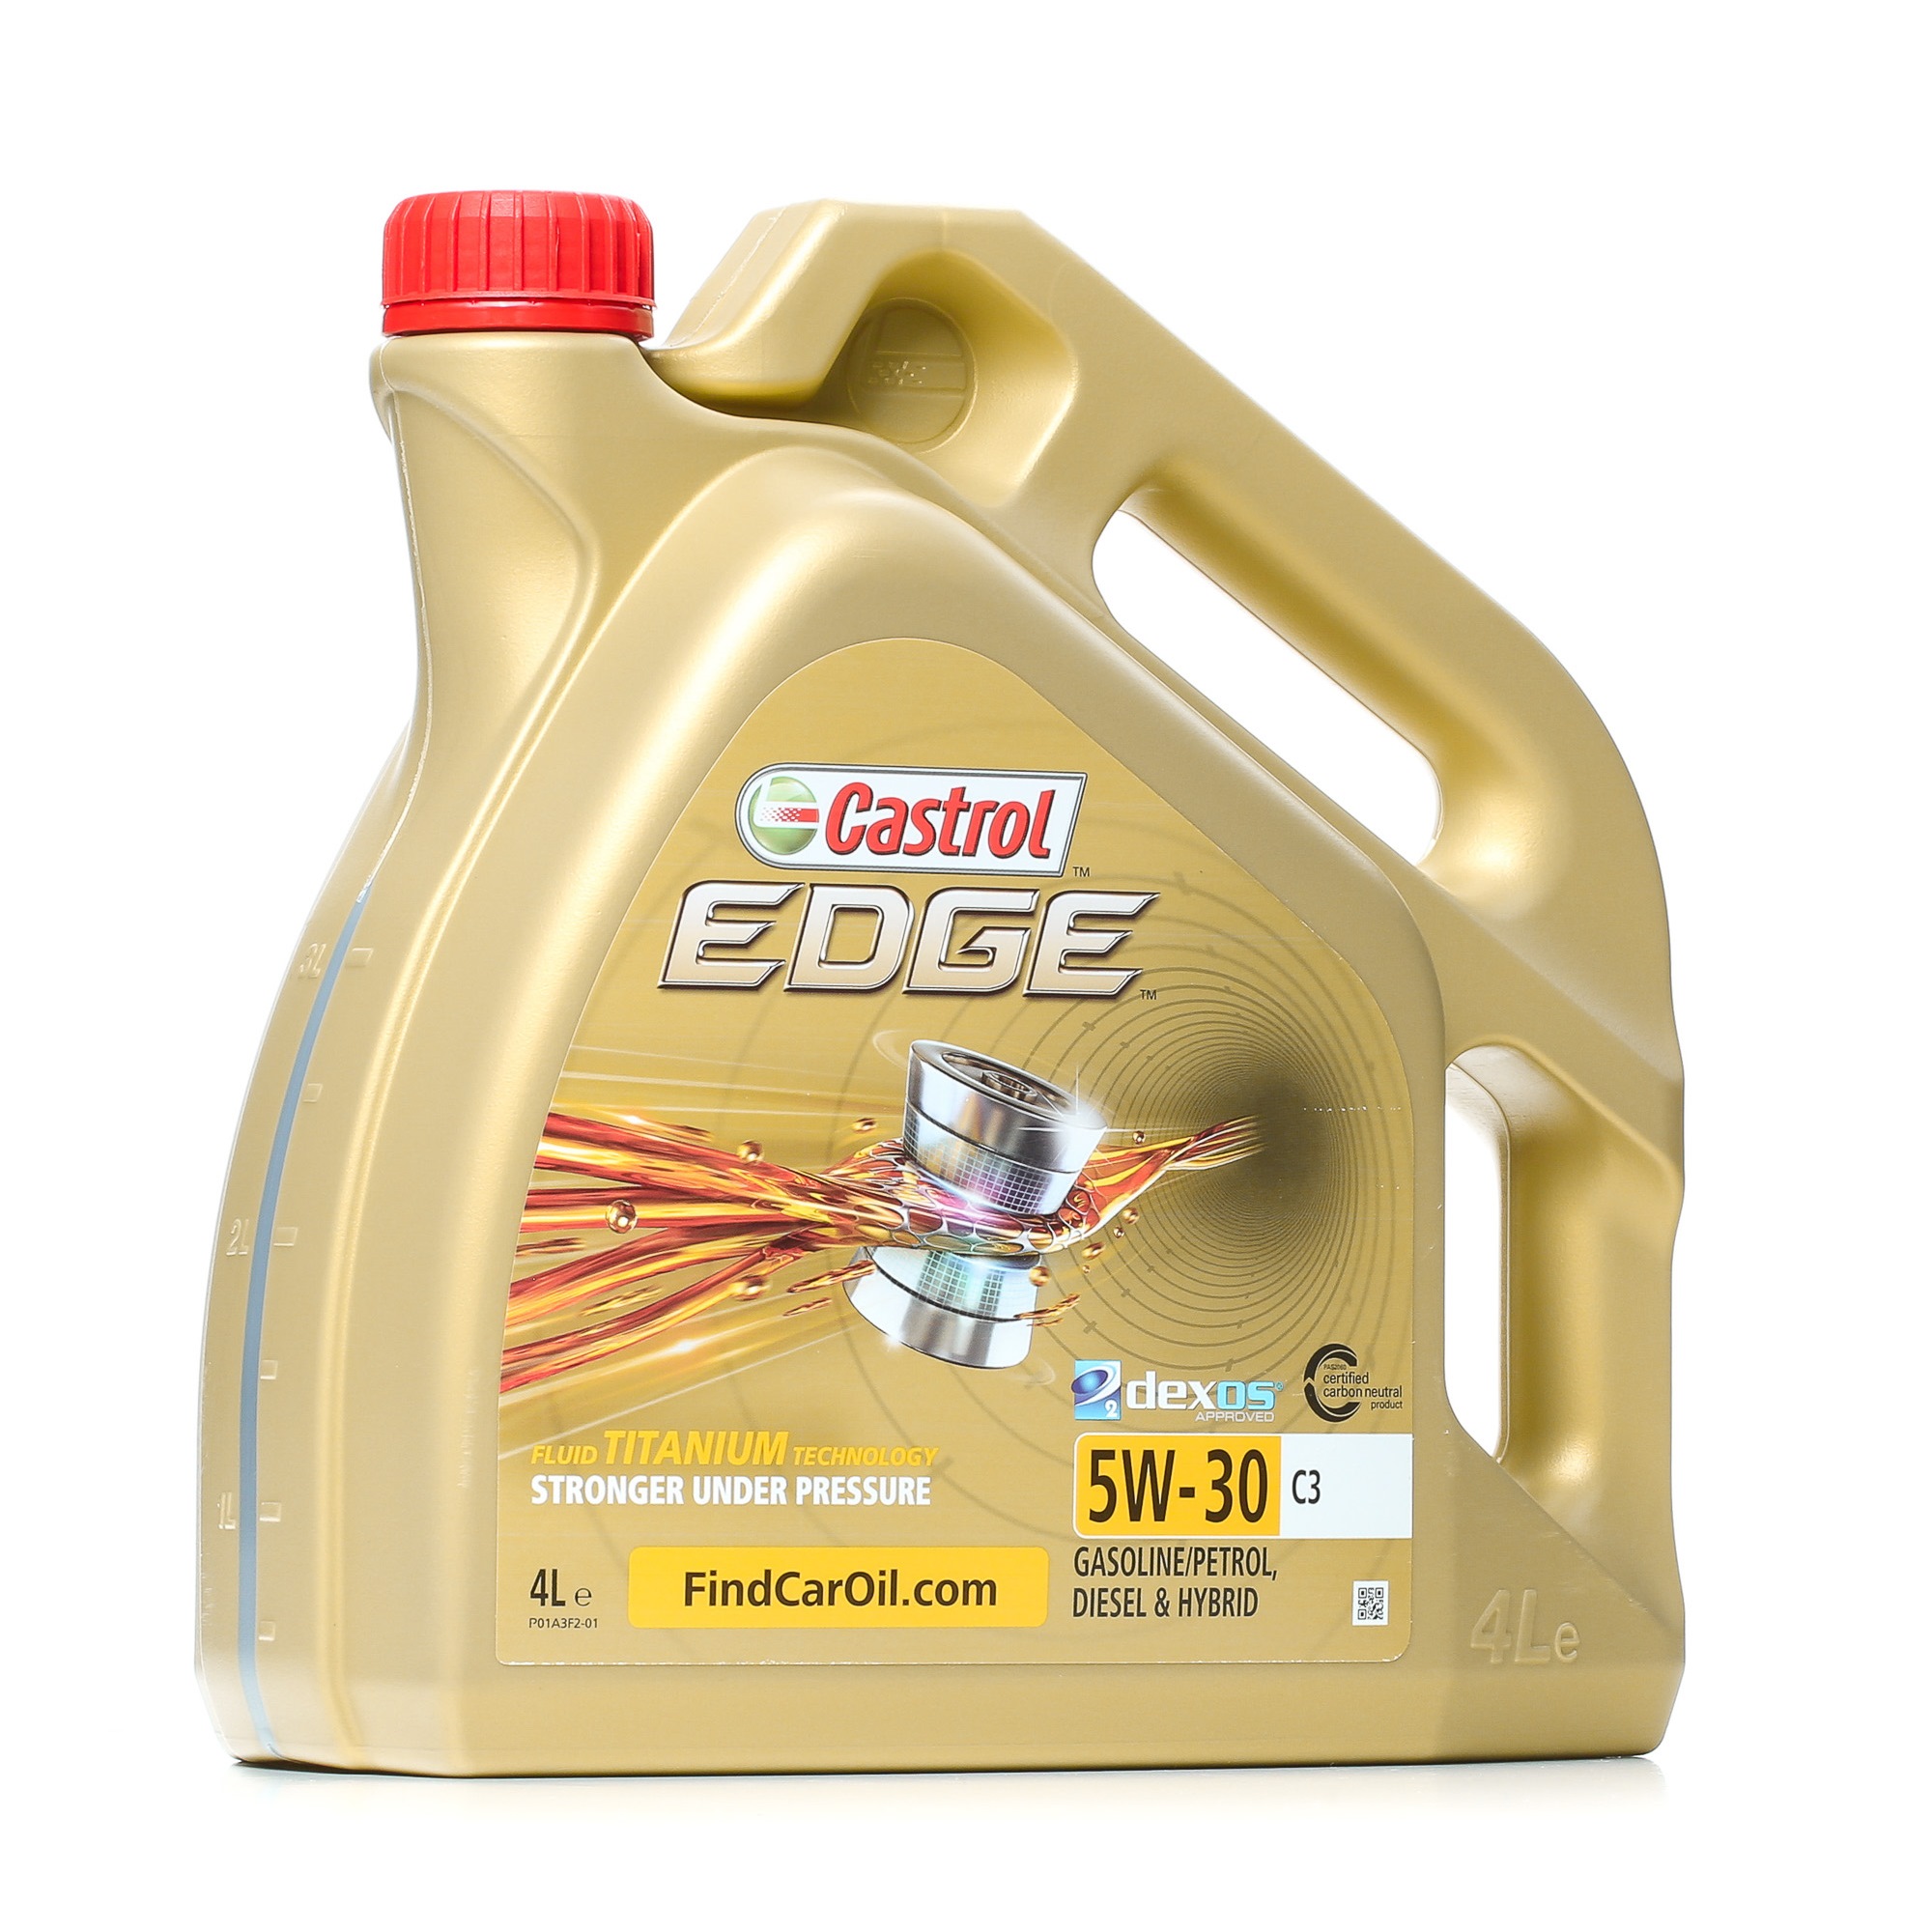 Land Rover Engine oil CASTROL 5W-30 at a good price